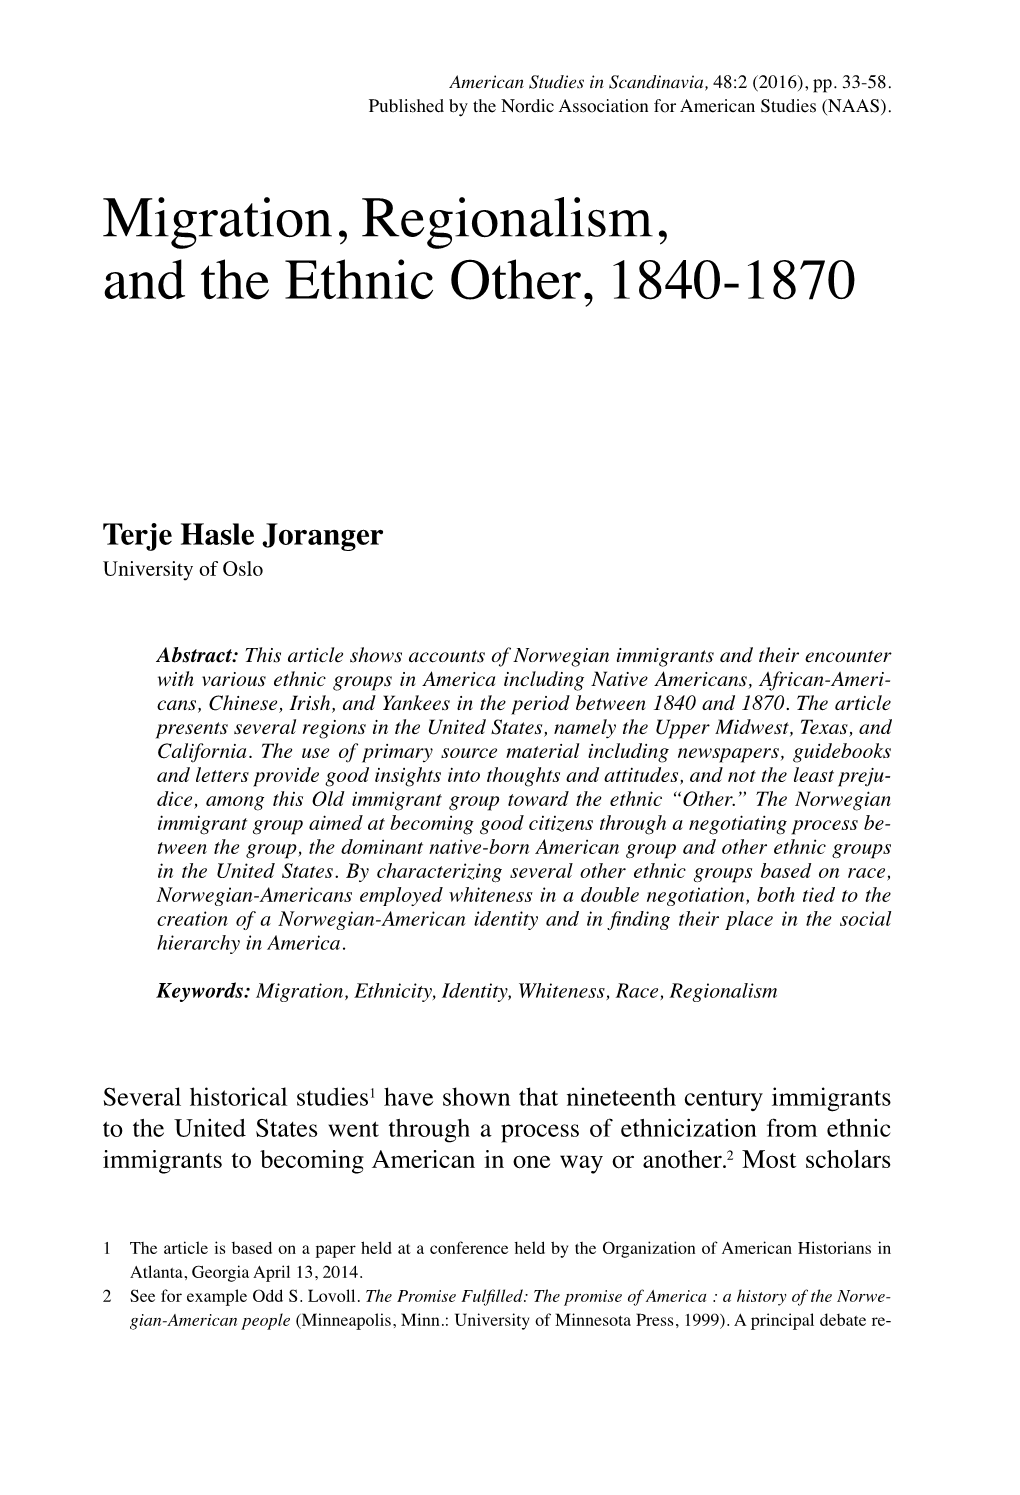 Migration, Regionalism, and the Ethnic Other, 1840-1870